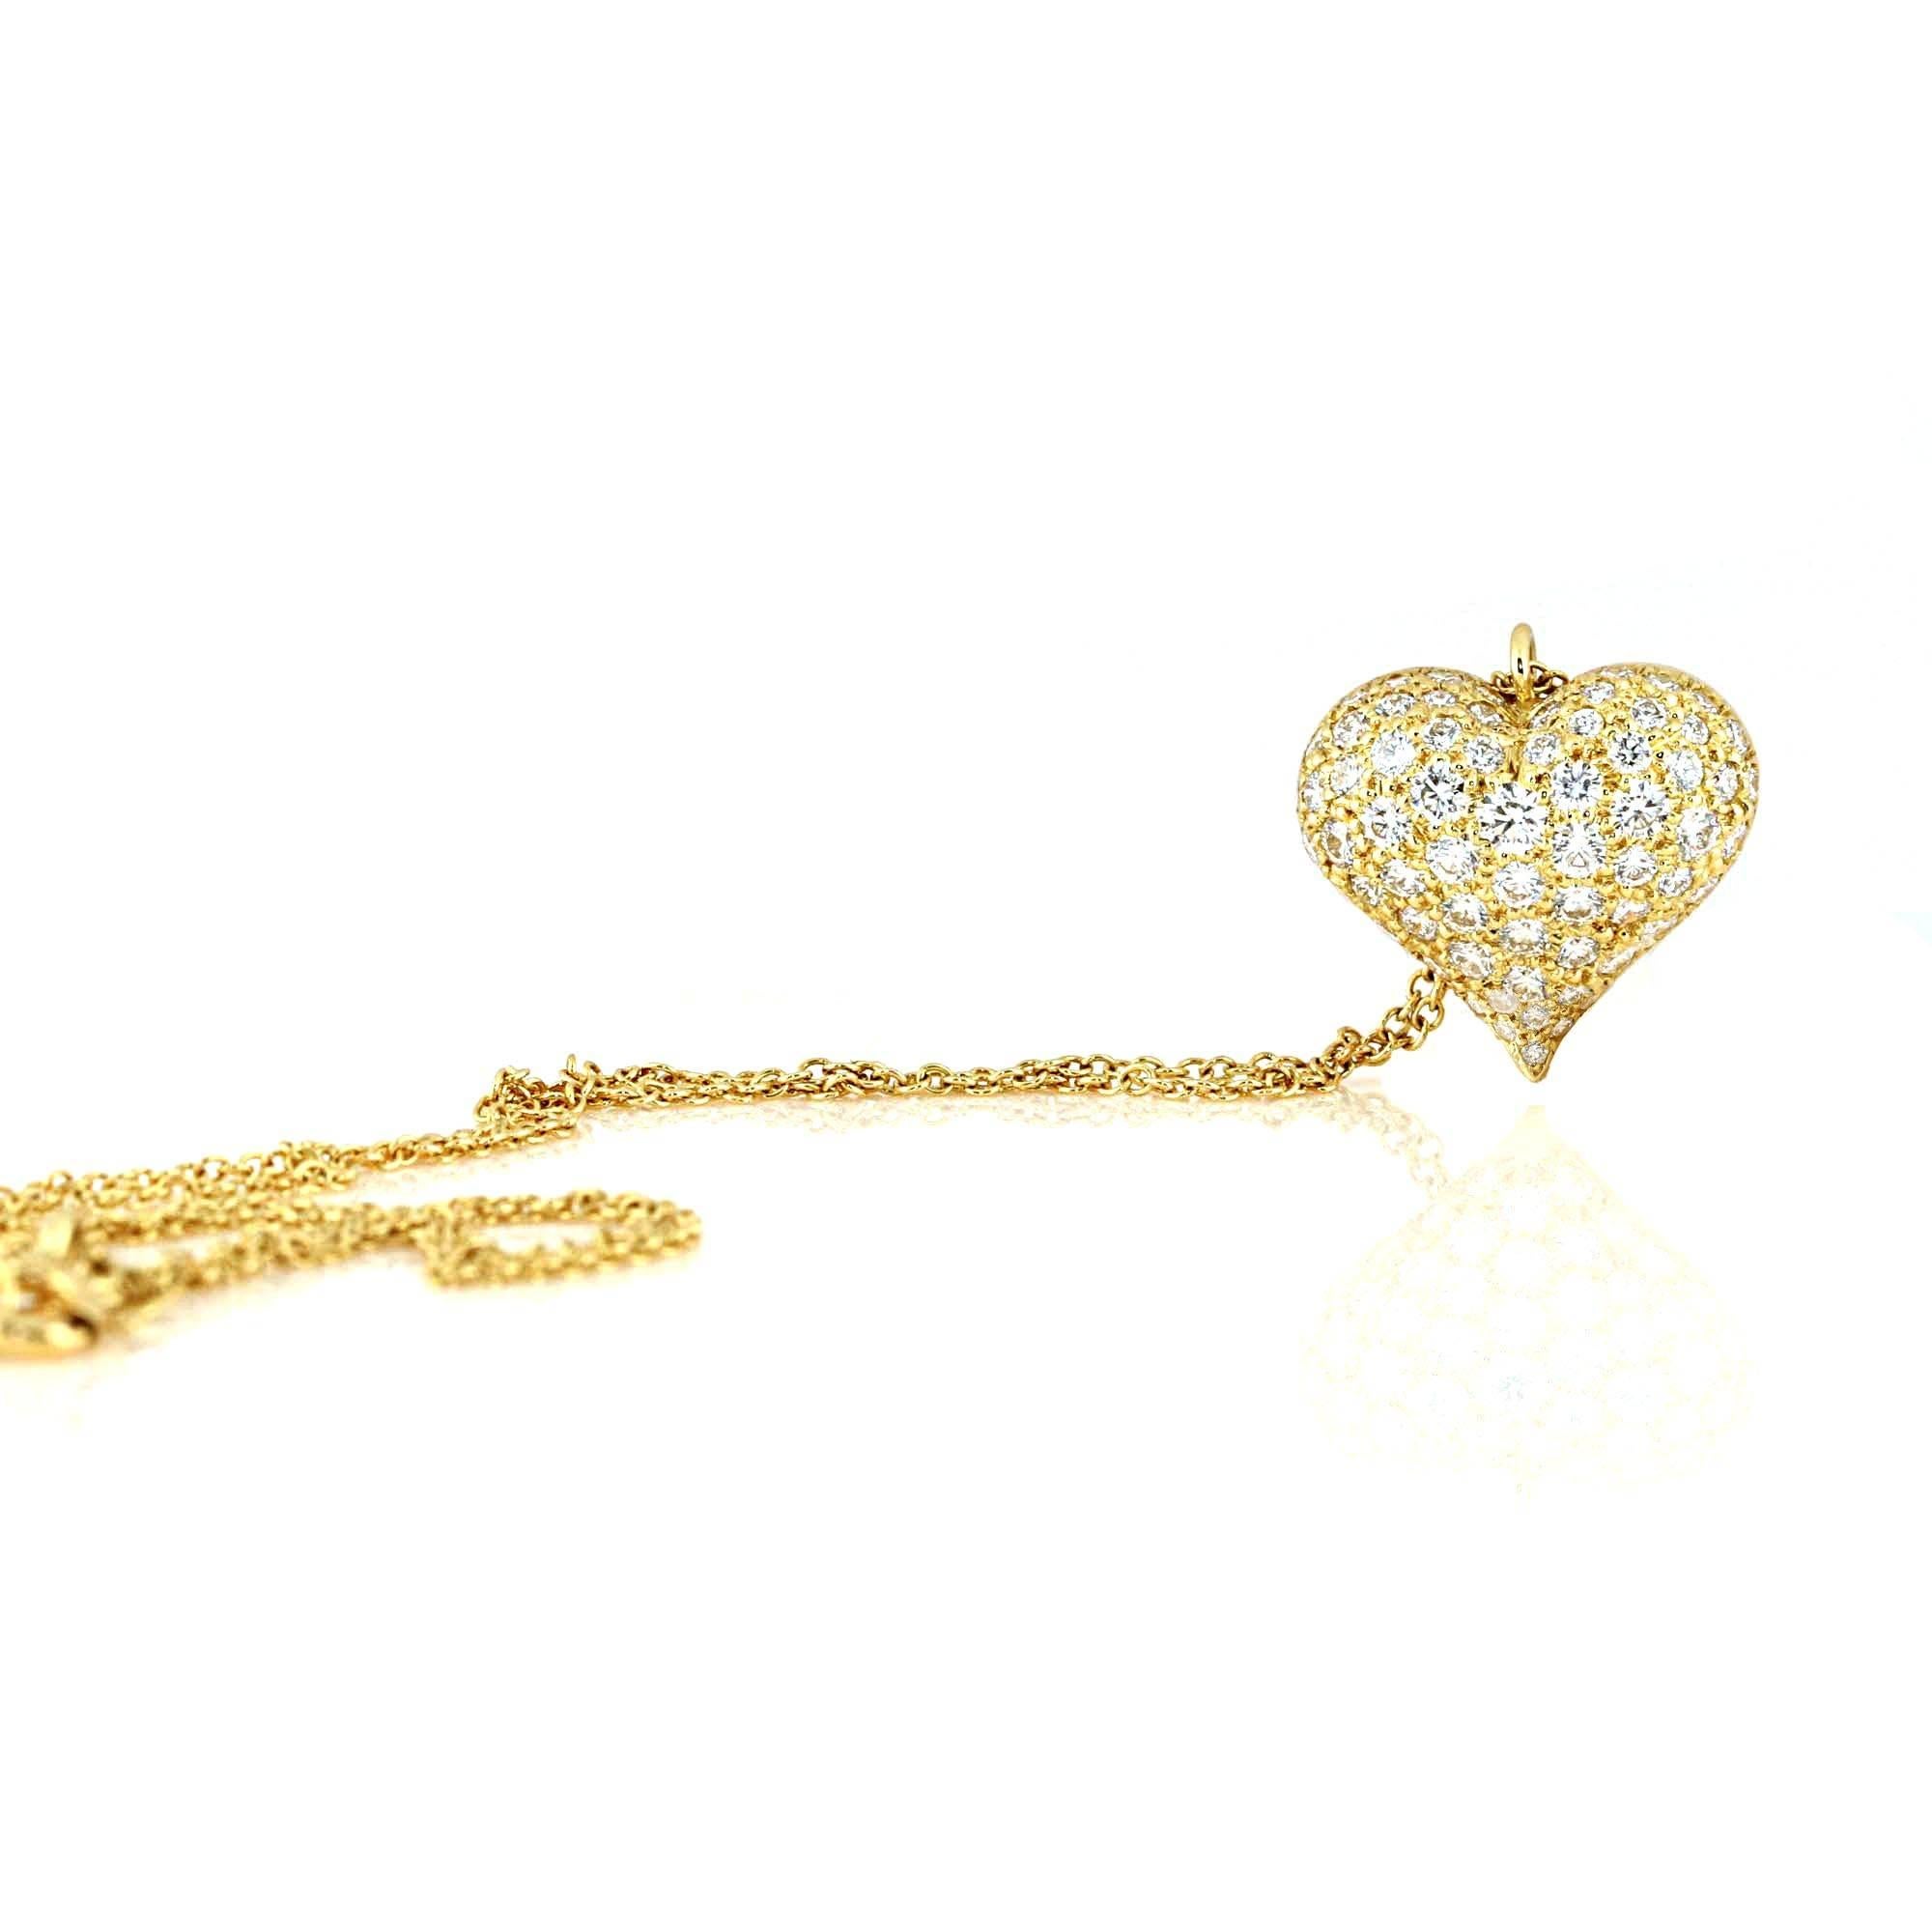 Gorgeous Tiffany & Co. yellow gold and diamond heart necklace. The diamonds in the heart weight approximately 1.80 carats. The color of the diamonds are F-G and are VS in clarity. One of the most timeless designs by Tiffany & Co. This can be dressed